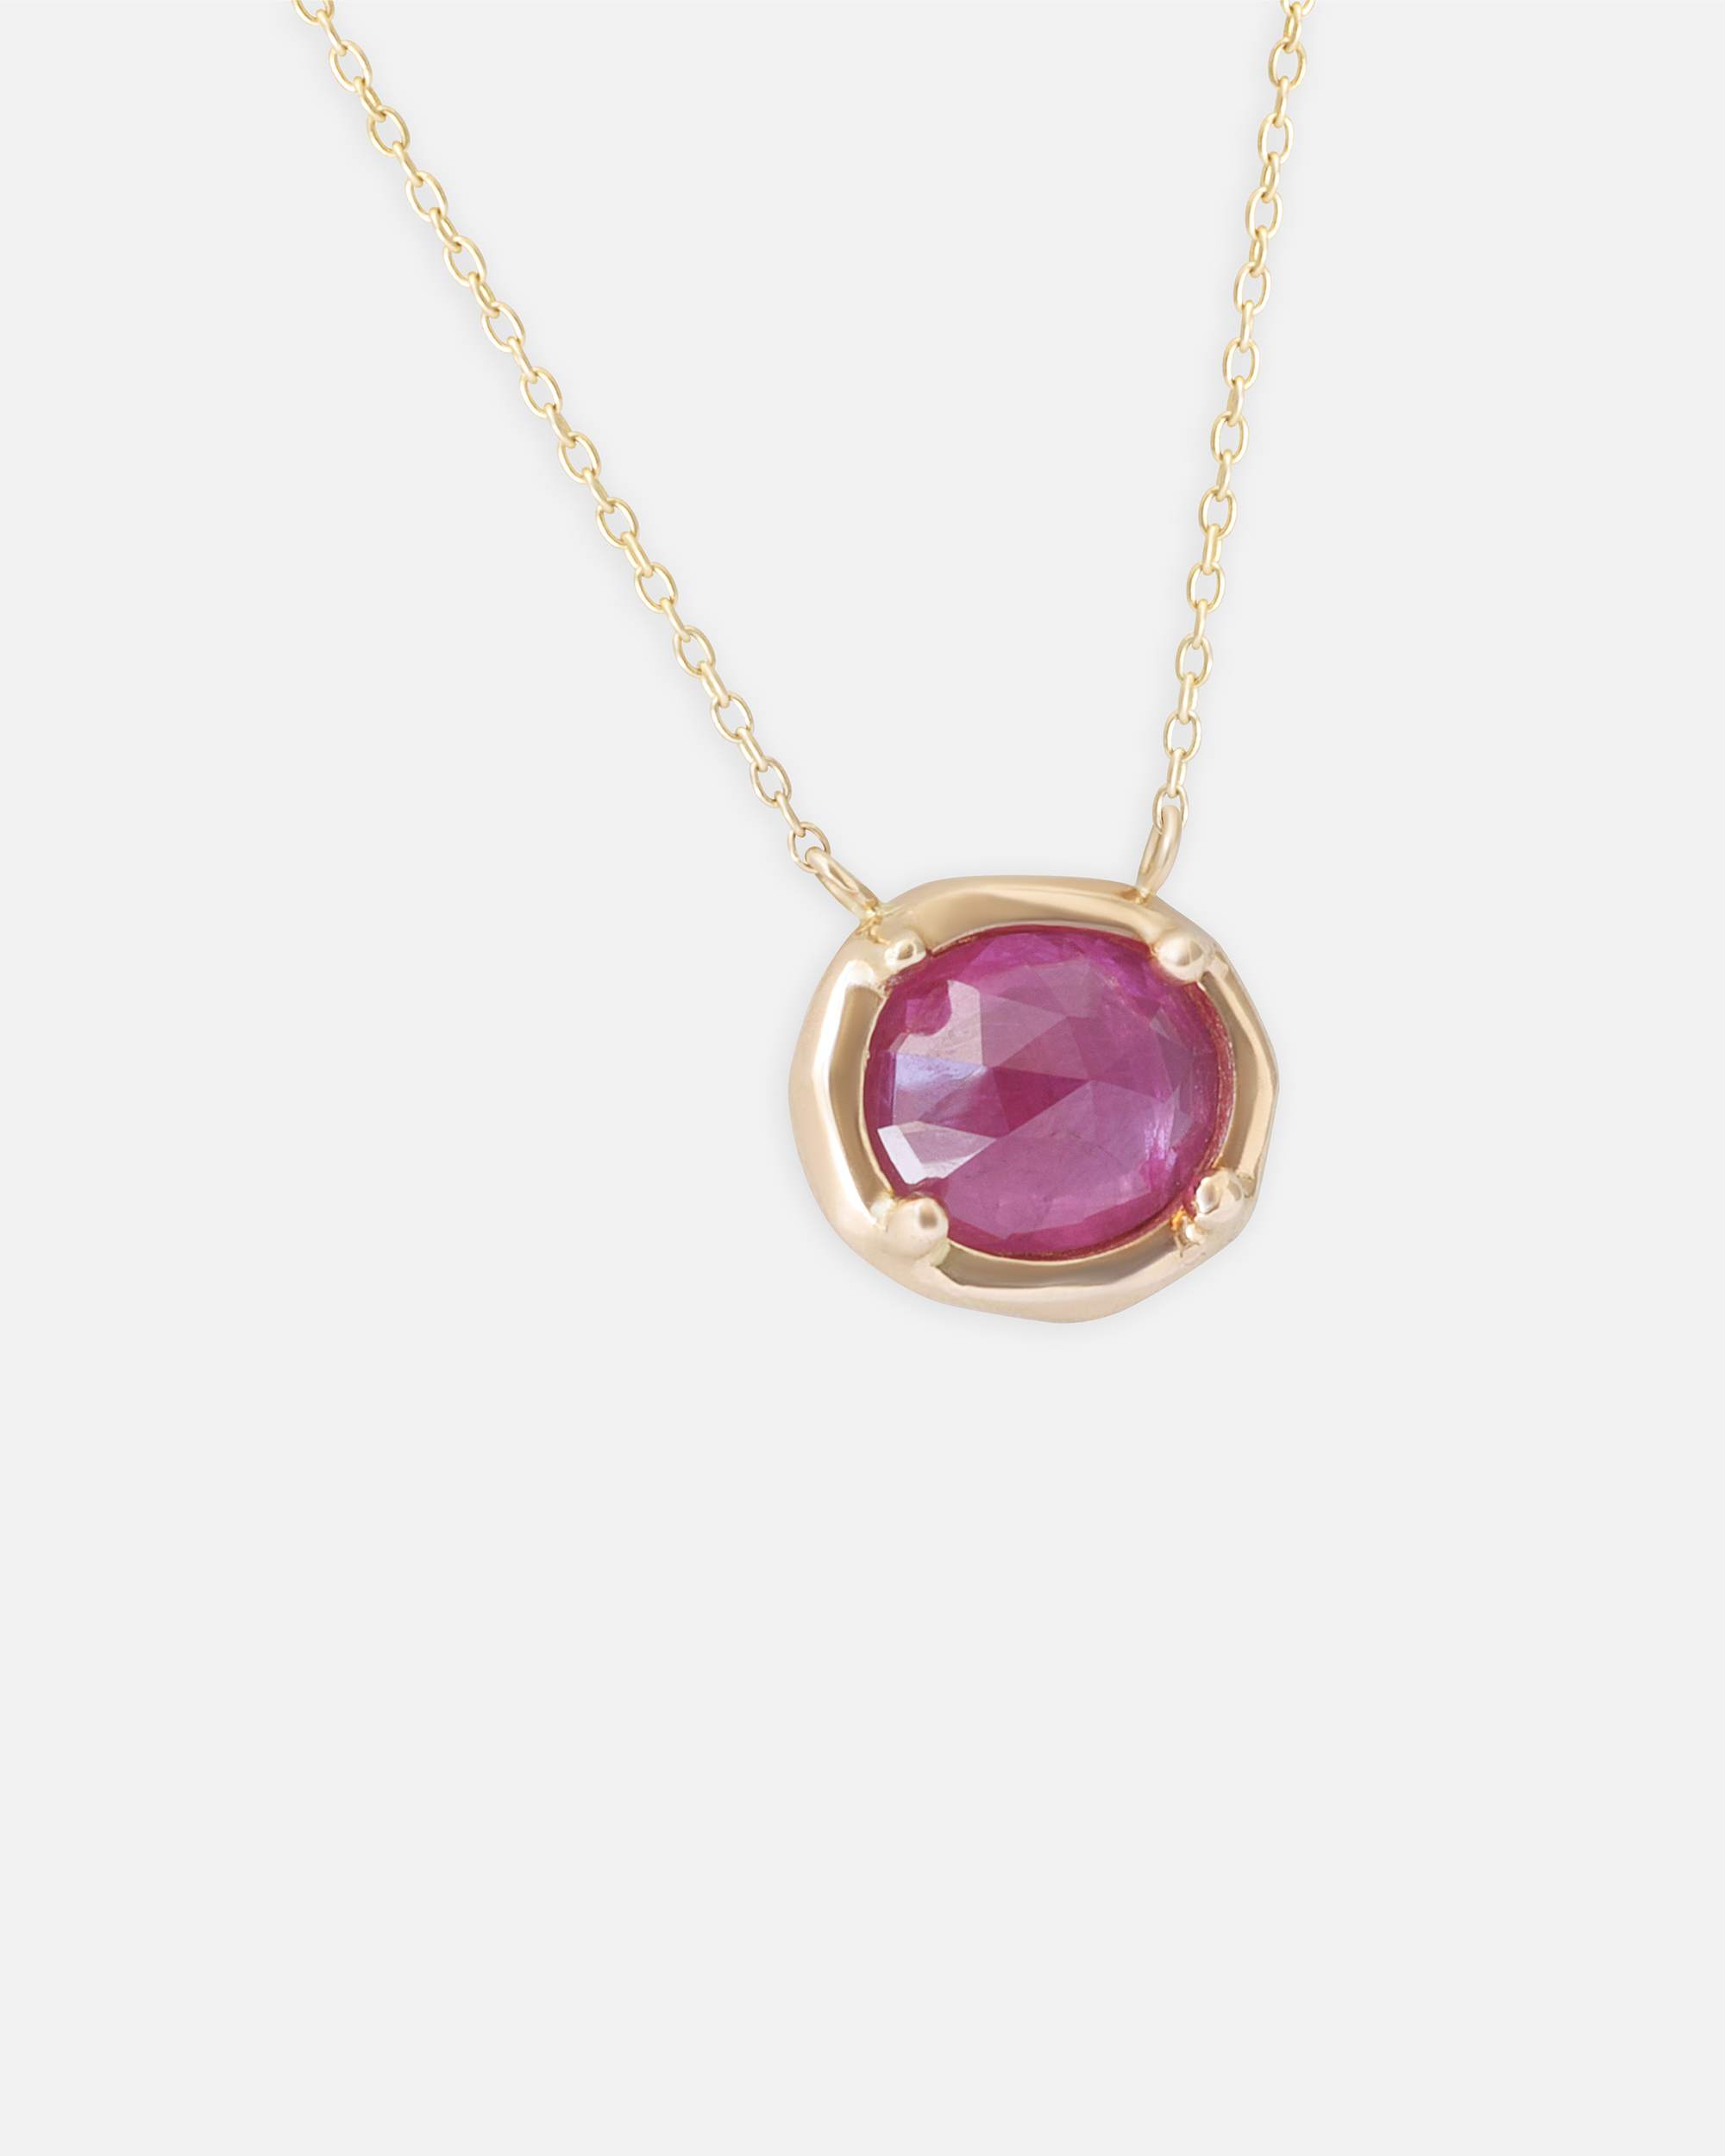 Pebble / Ruby Freeform Pendant By fitzgerald jewelry